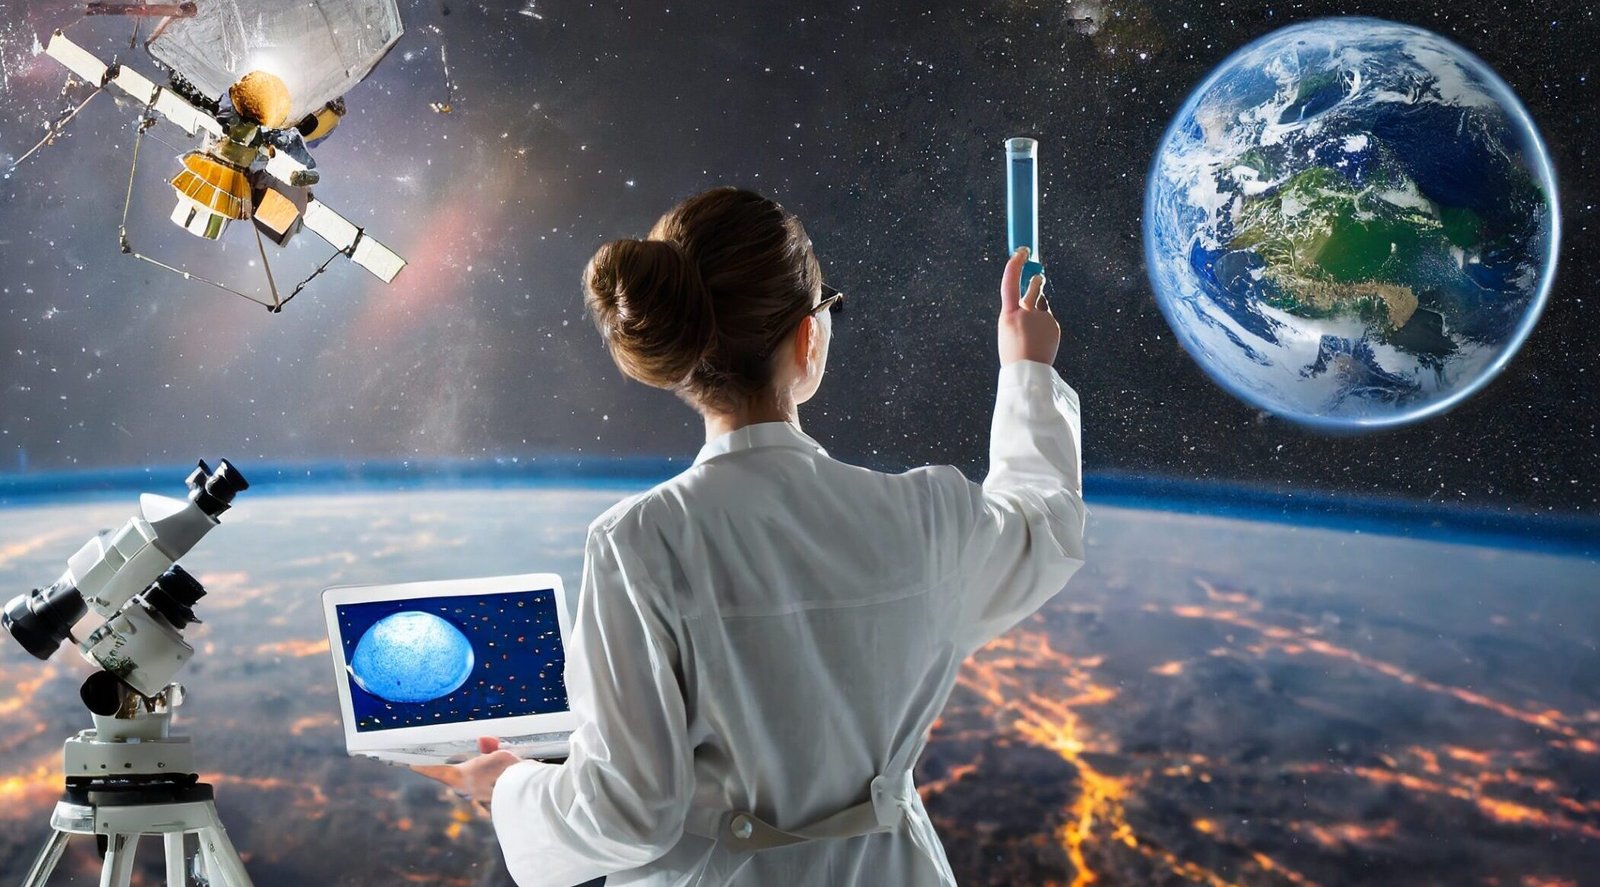 Lady scientist, with her equipment looking over the earth and space